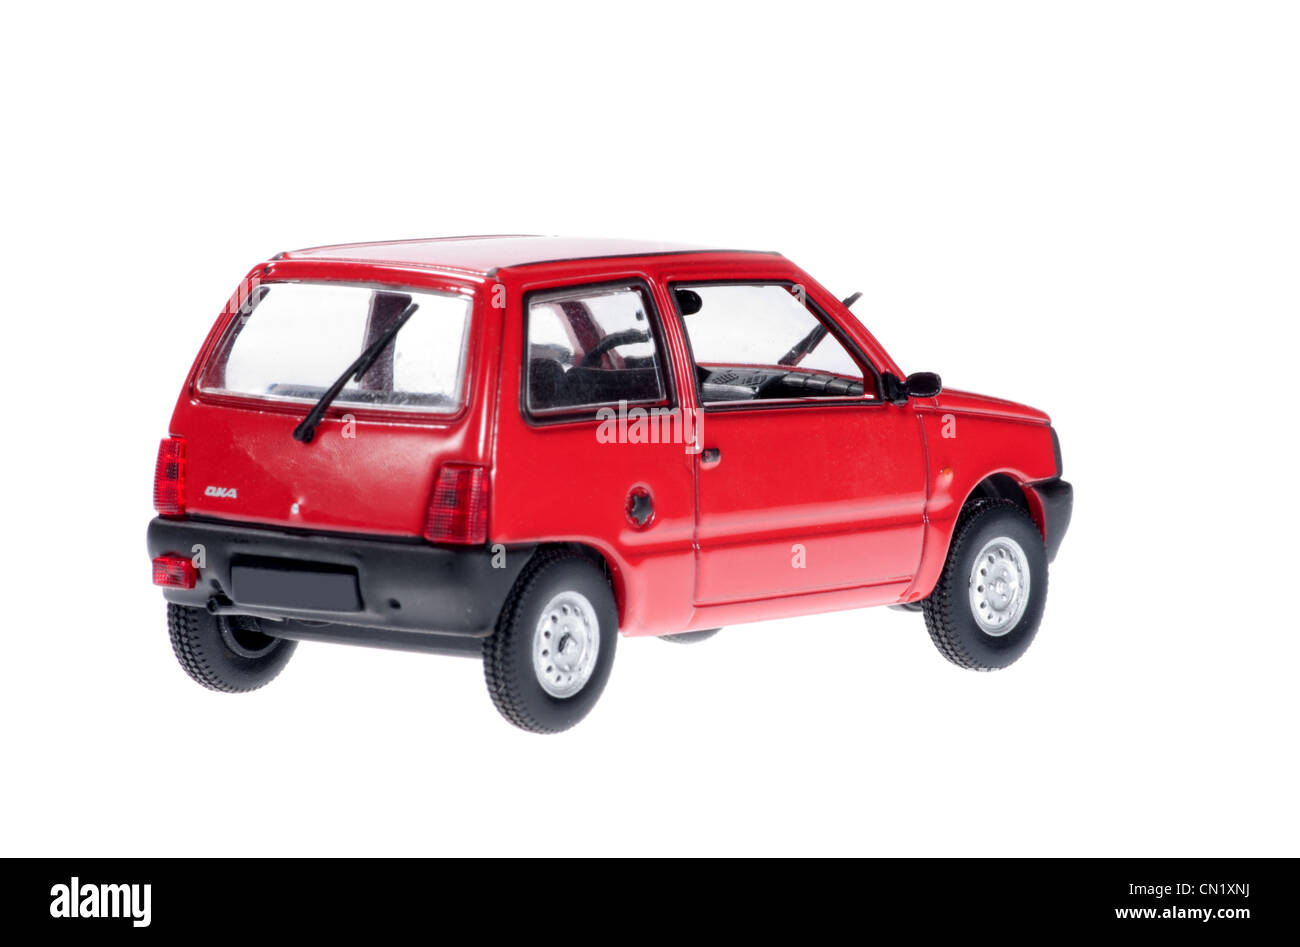 Small red car on white background. Stock Photo